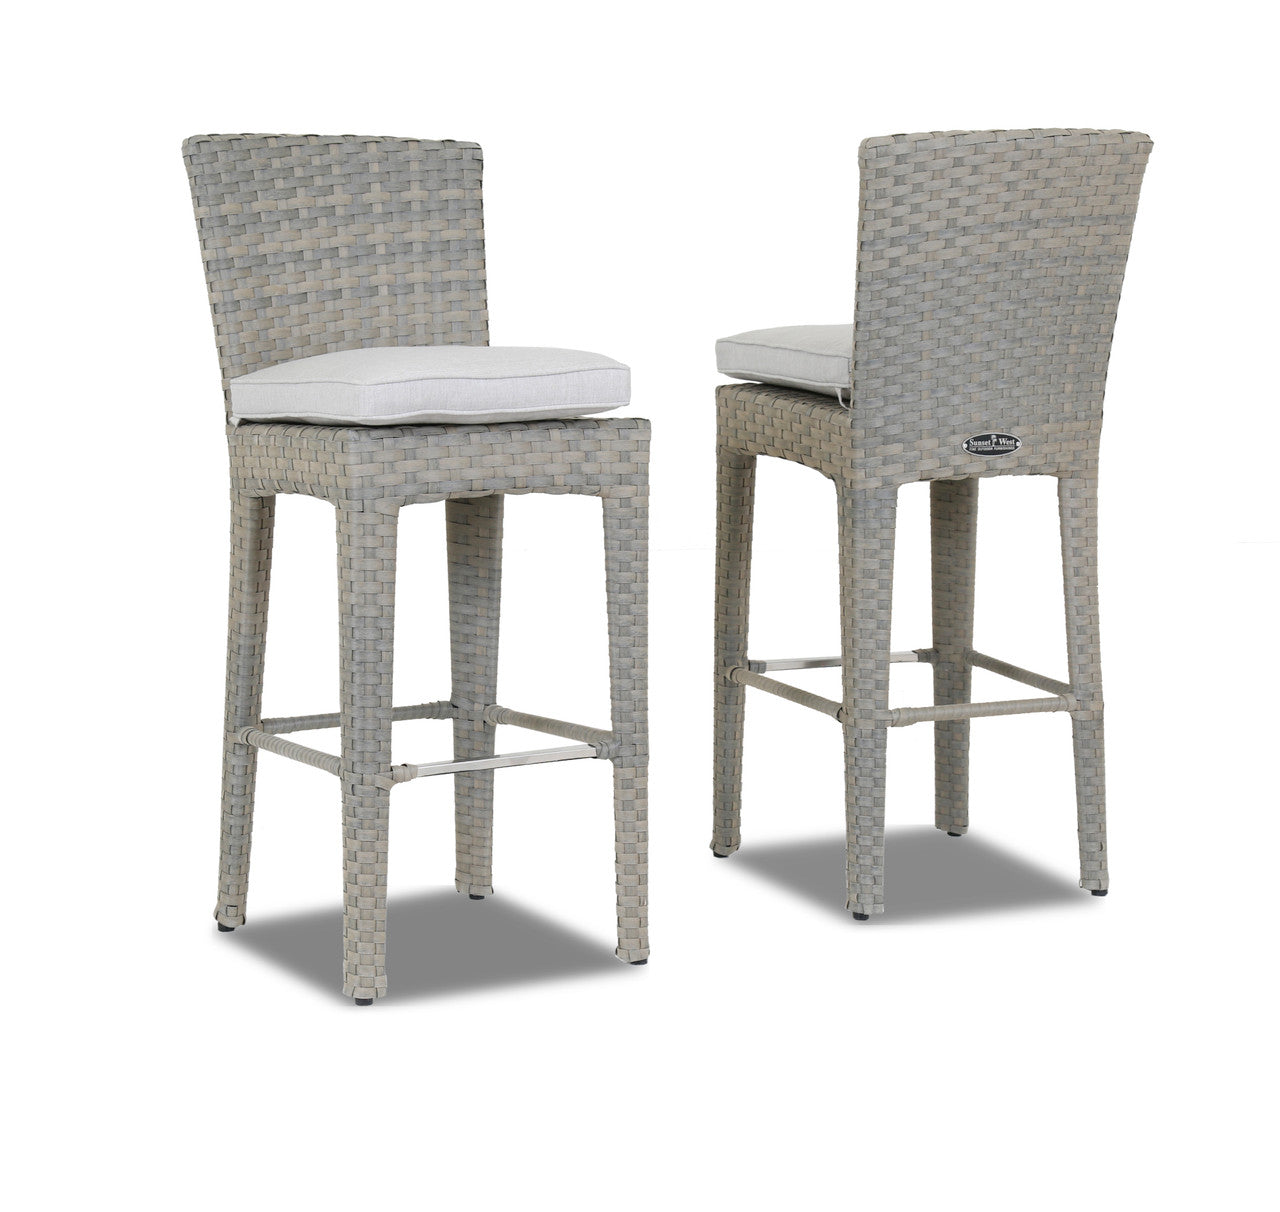 Replacement Cushions for Sunset West Majorca Counter Stool